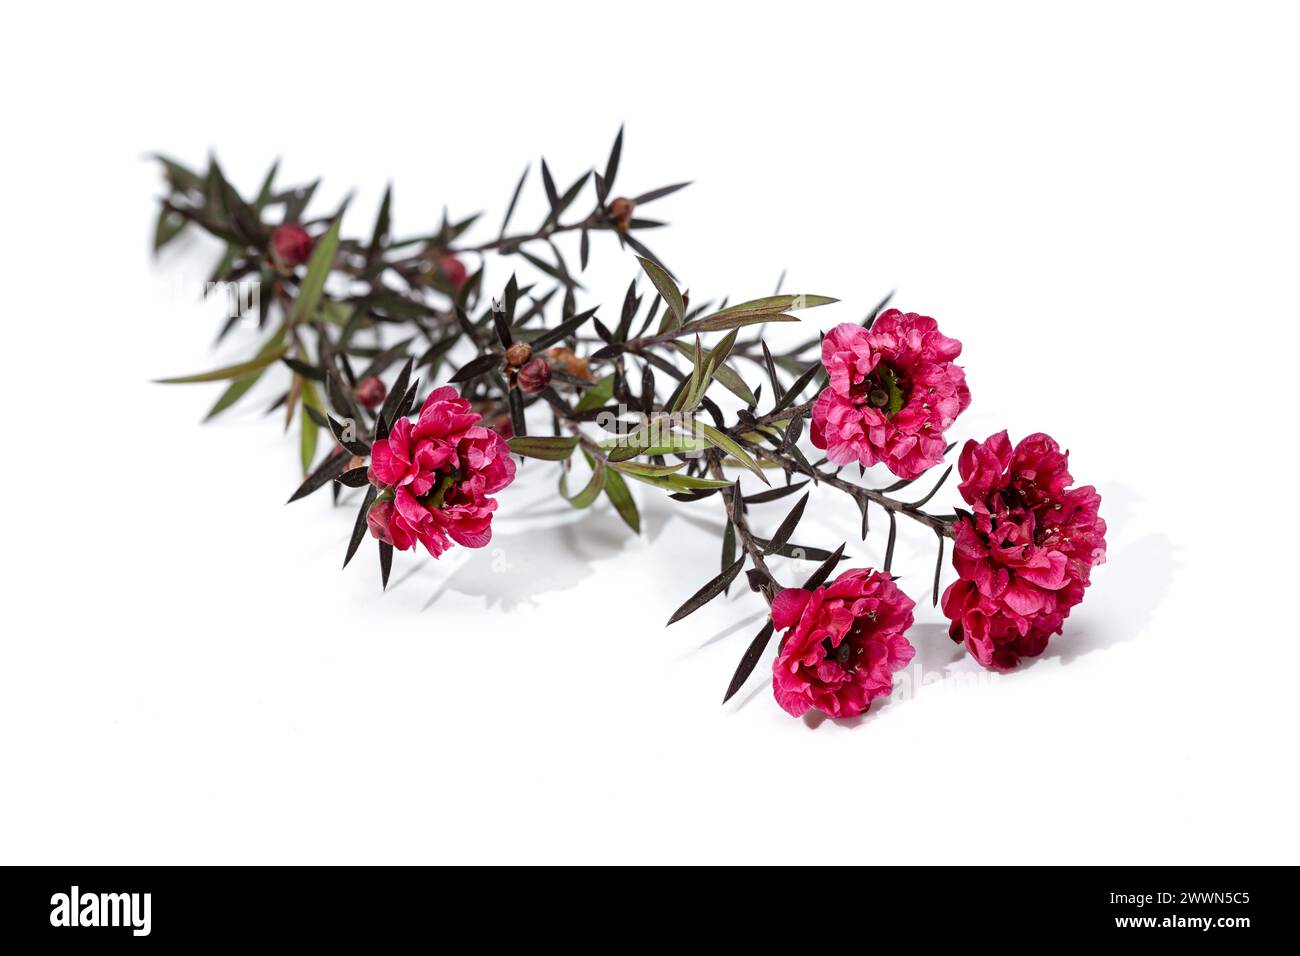 Leptospermum scoparium twig with bloomed pink flowers isolated on white background Stock Photo